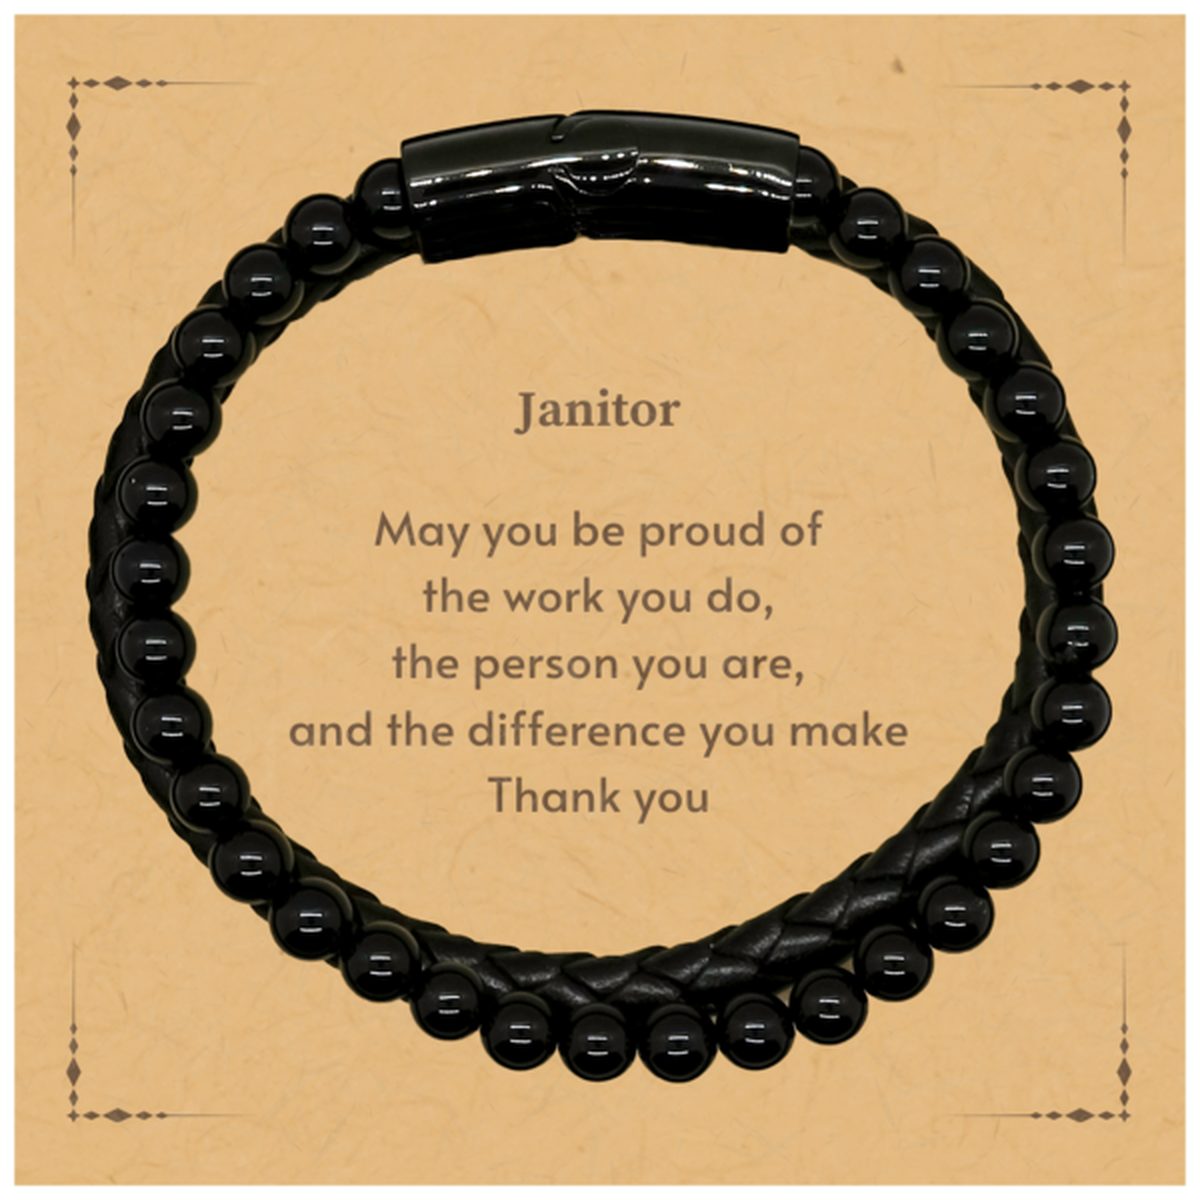 Heartwarming Stone Leather Bracelets Retirement Coworkers Gifts for Janitor, Janitor May You be proud of the work you do, the person you are Gifts for Boss Men Women Friends